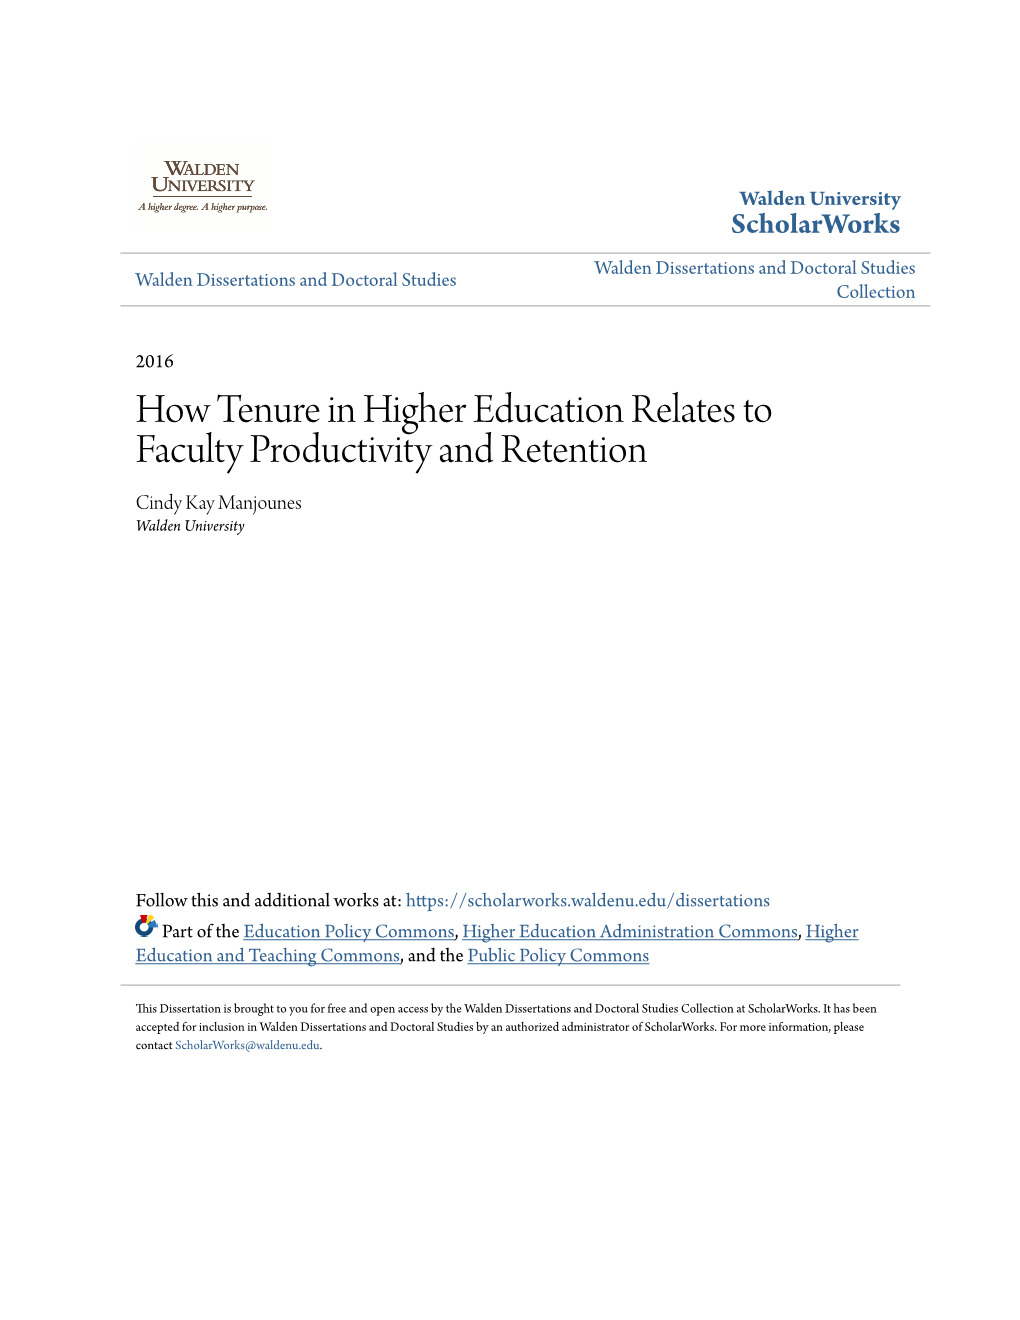 How Tenure in Higher Education Relates to Faculty Productivity and Retention Cindy Kay Manjounes Walden University